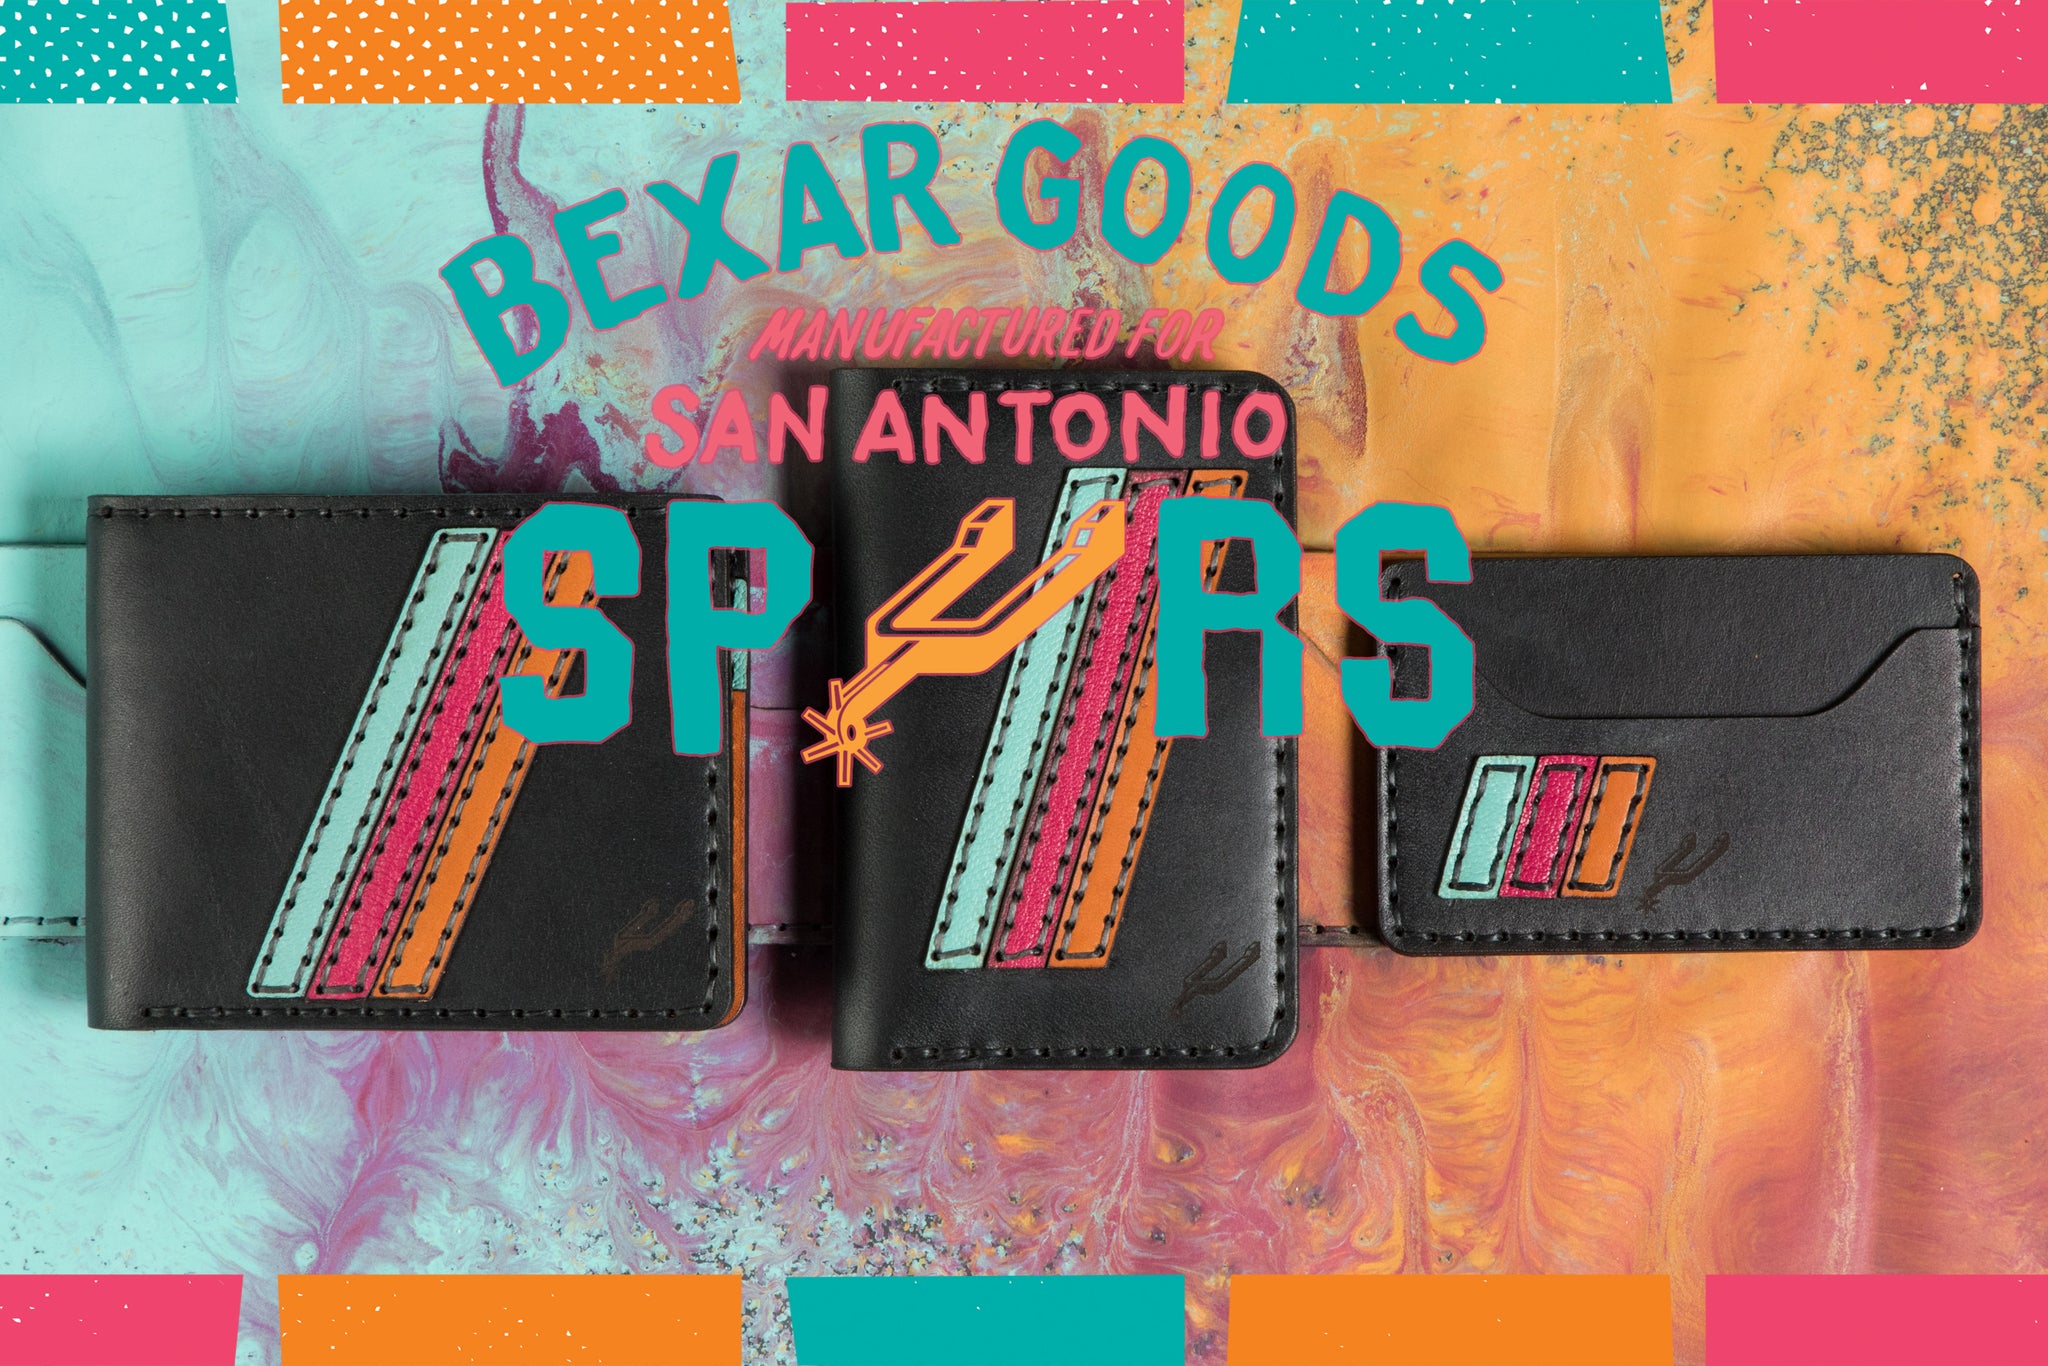 3 Spurs x Bexar Goods collaboration wallets sit on top of a colorful fiesta style splatter of paint